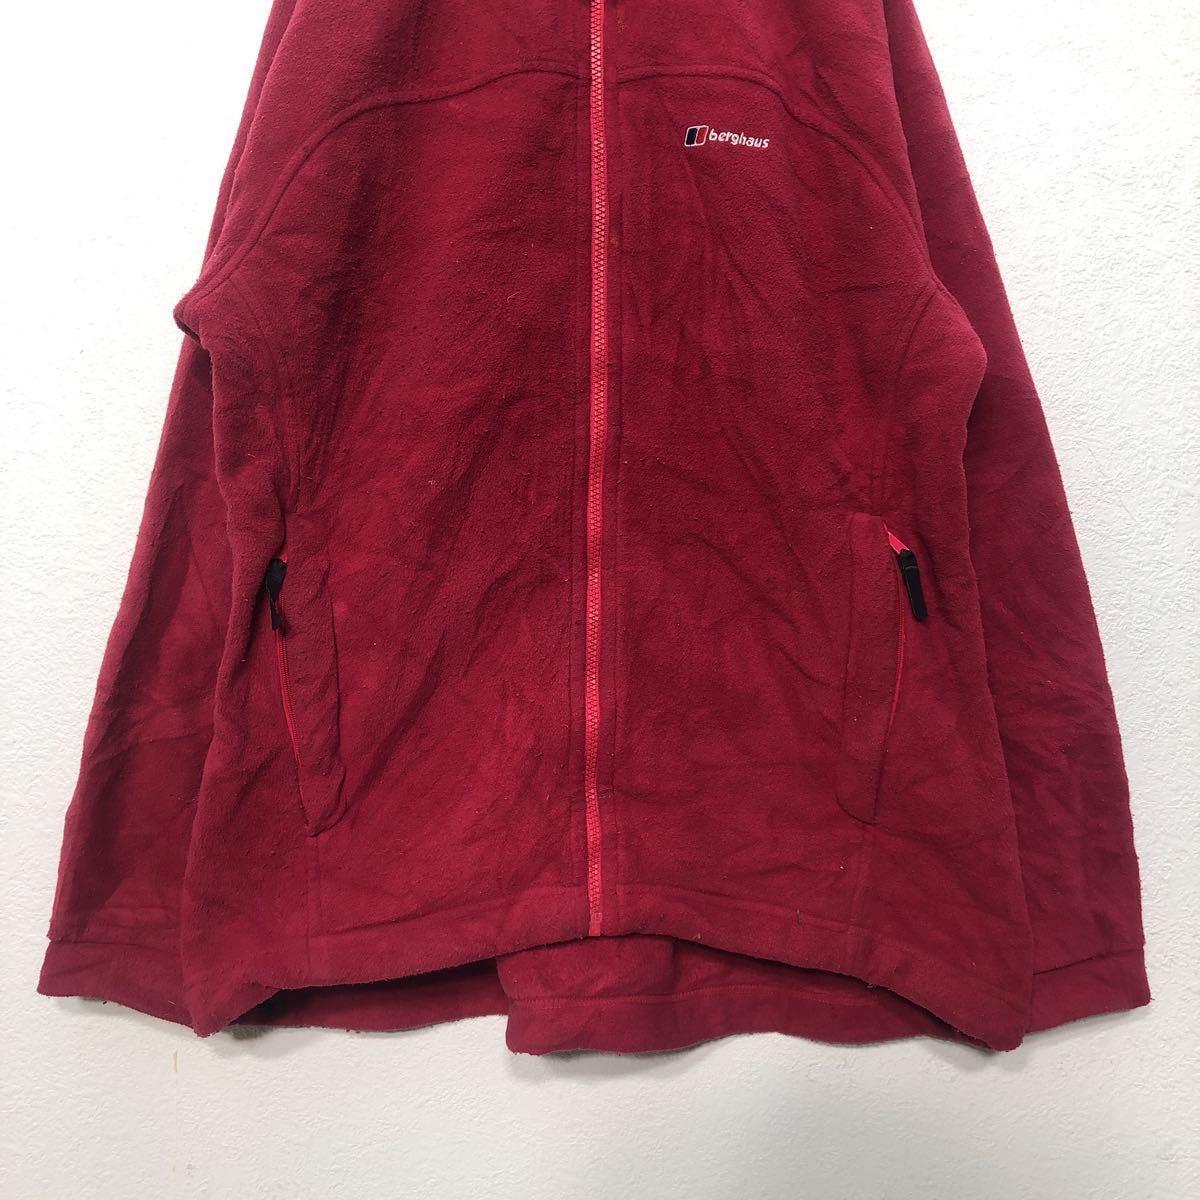 berghaus fleece jacket size 16 XL bar g house wi men's euro outdoor red red old clothes . America stock a402-5062